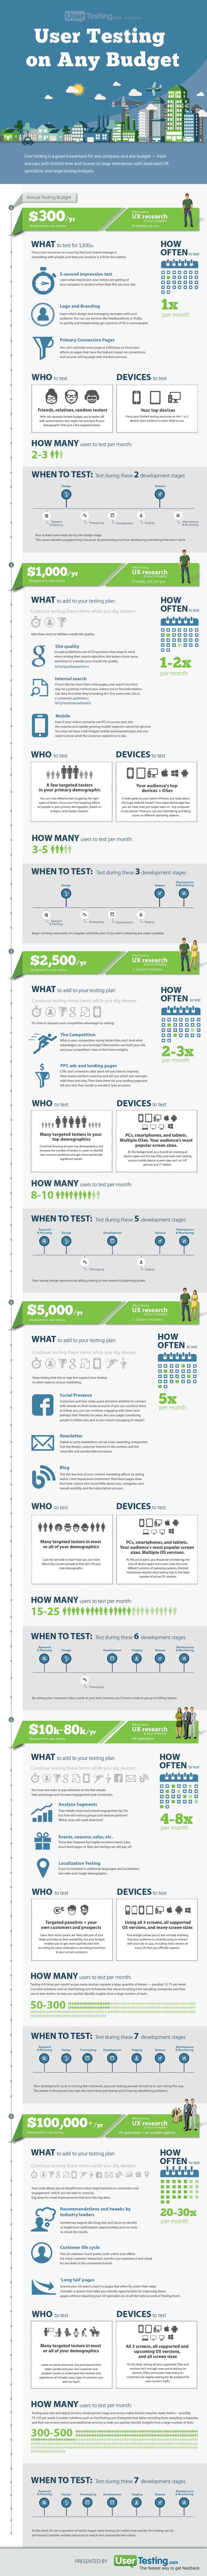 User Testing on Any Budget Infographic